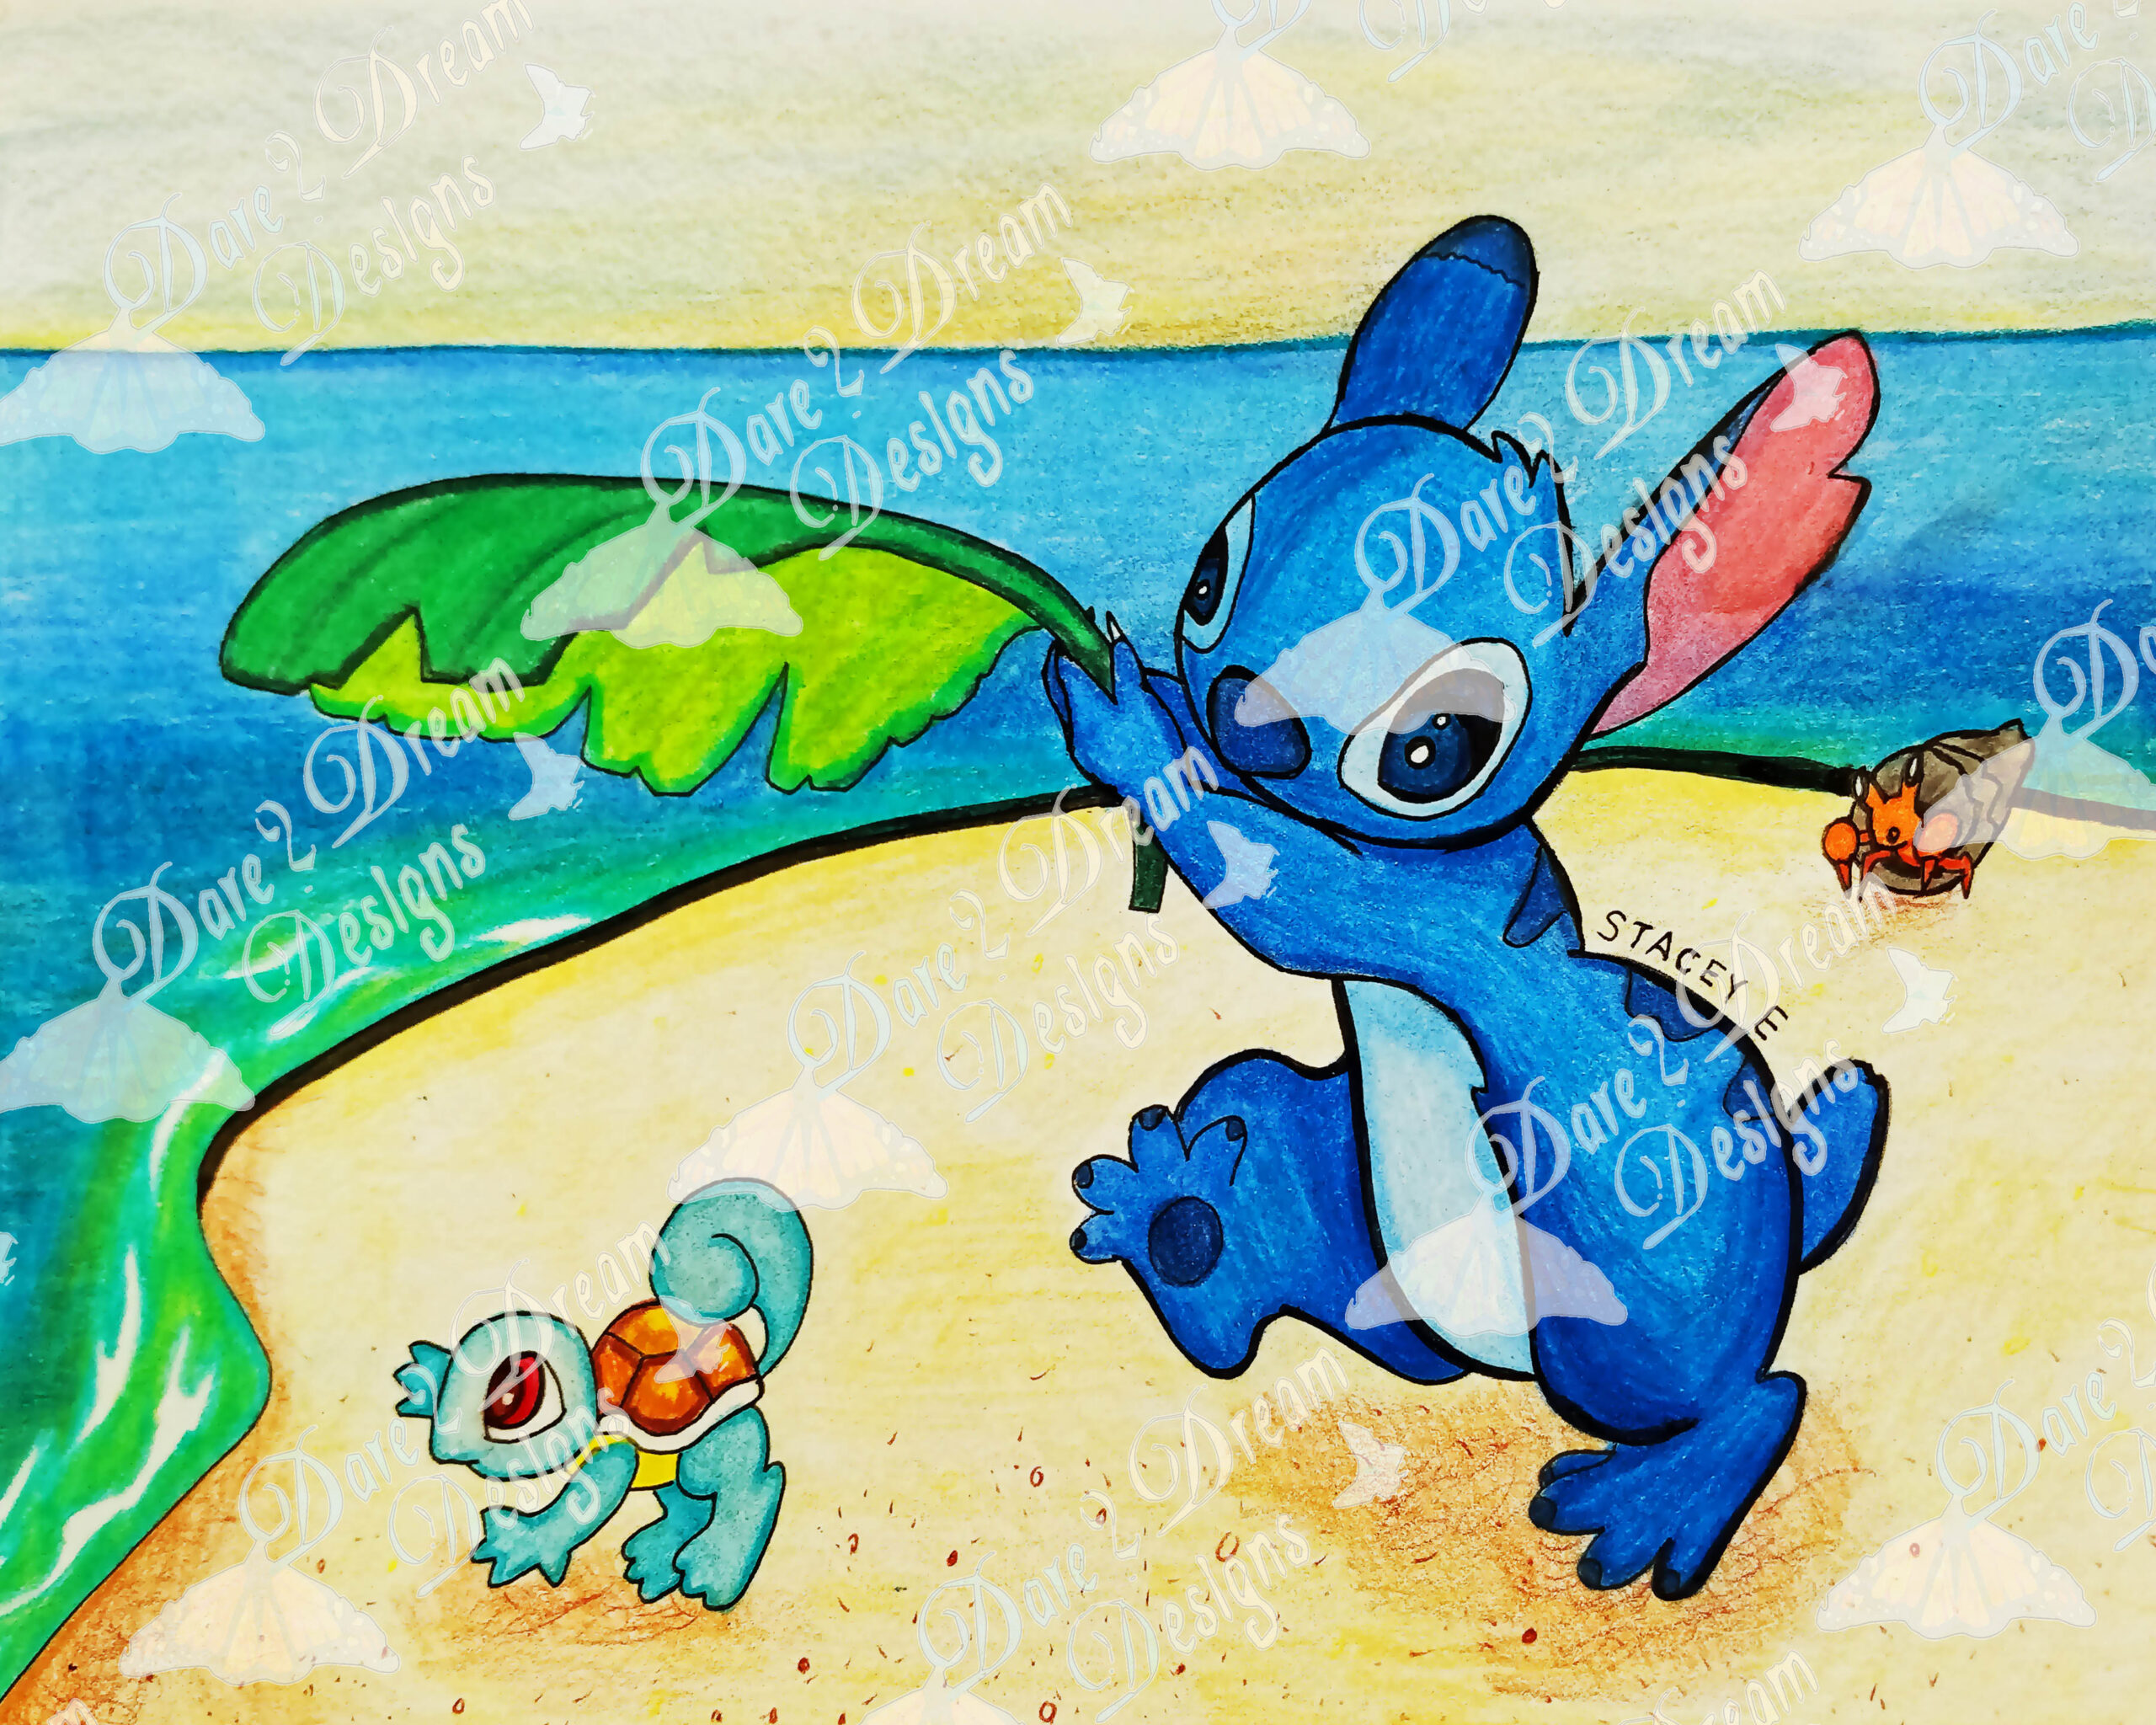 Stitch and Squirtle